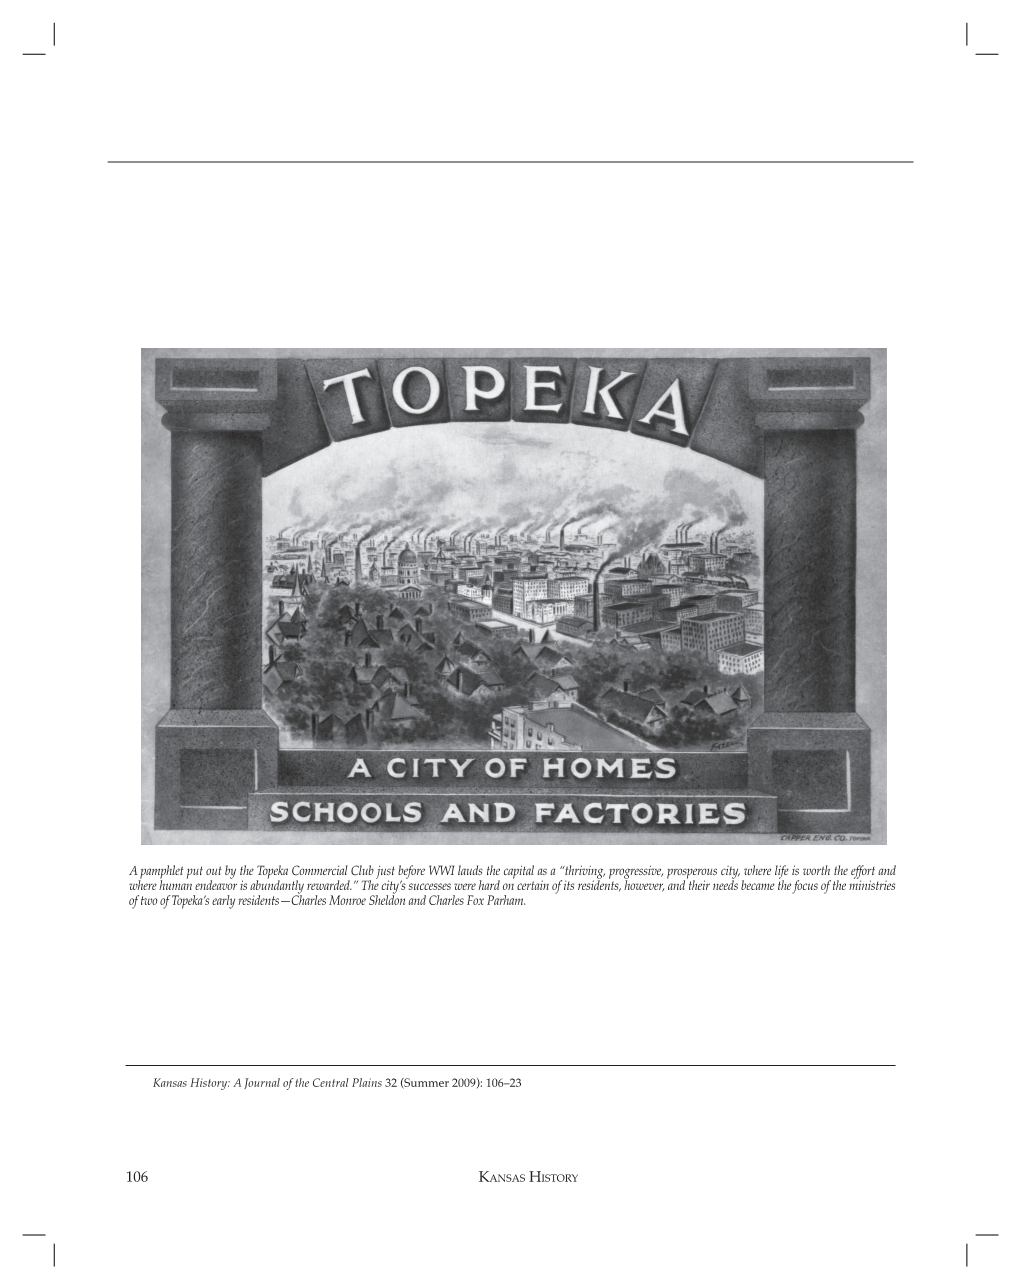 A Pamphlet Put out by the Topeka